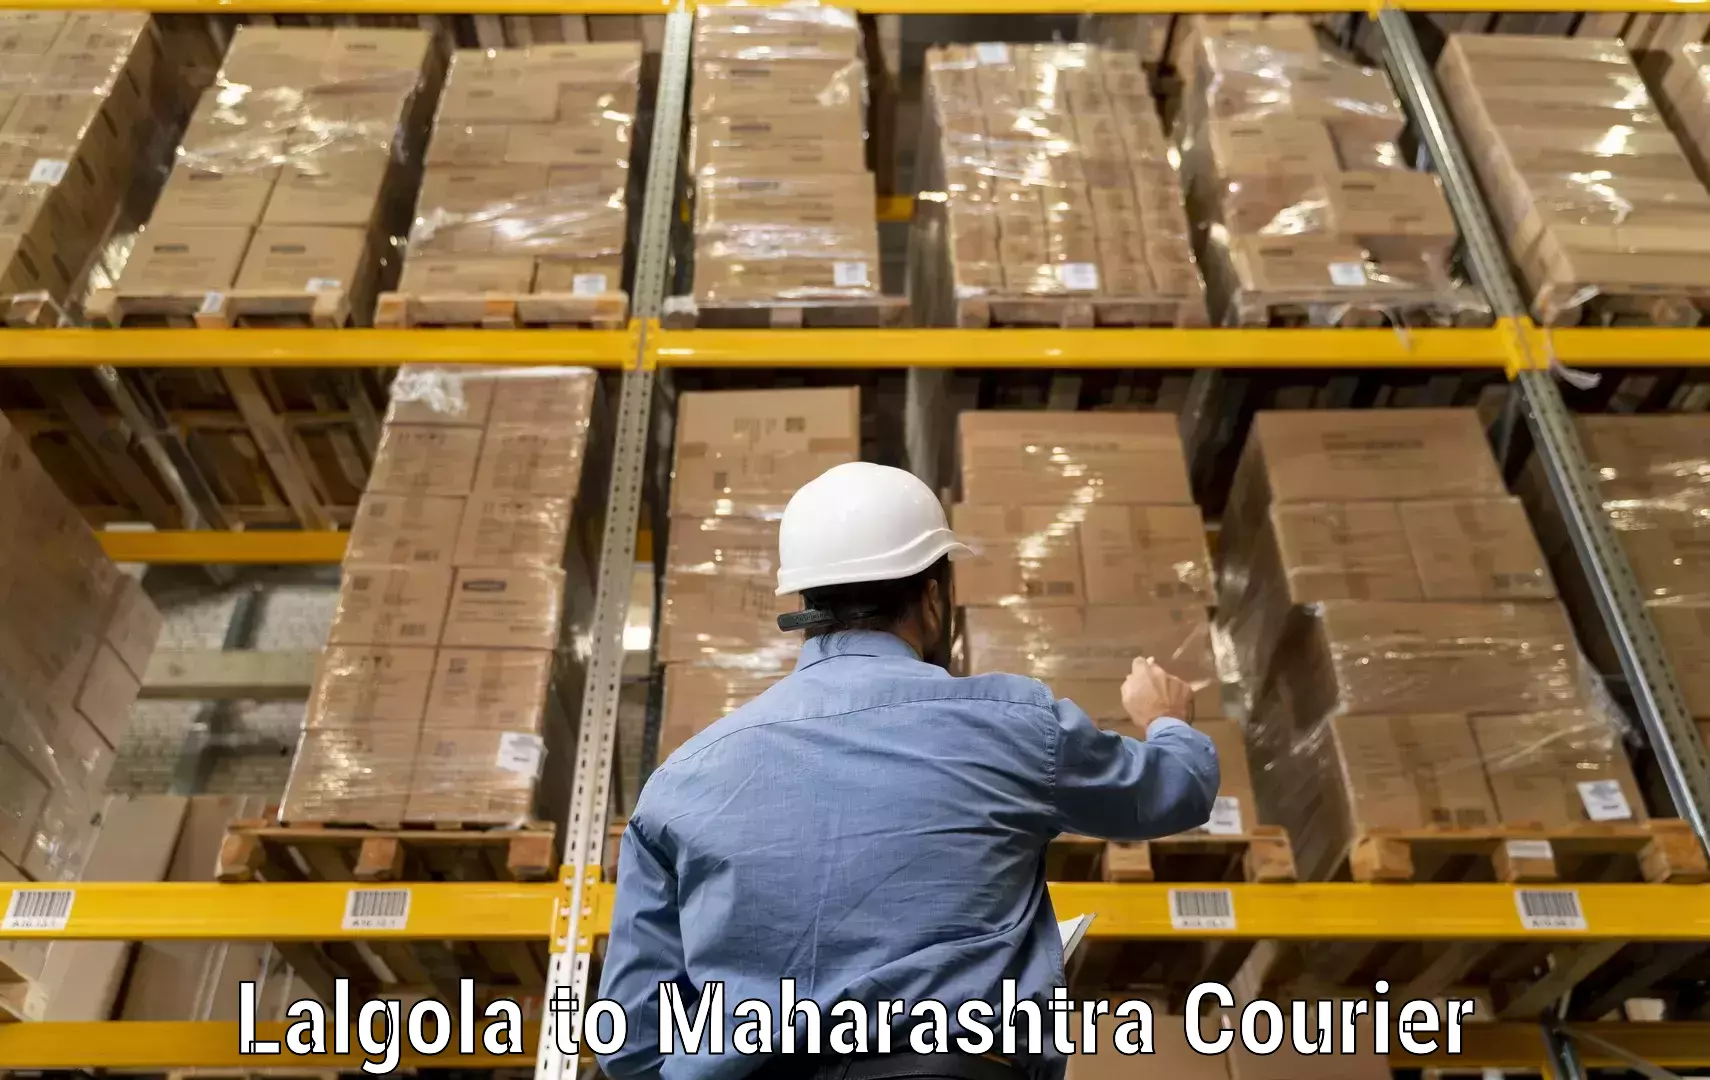 Courier service booking Lalgola to Maharashtra